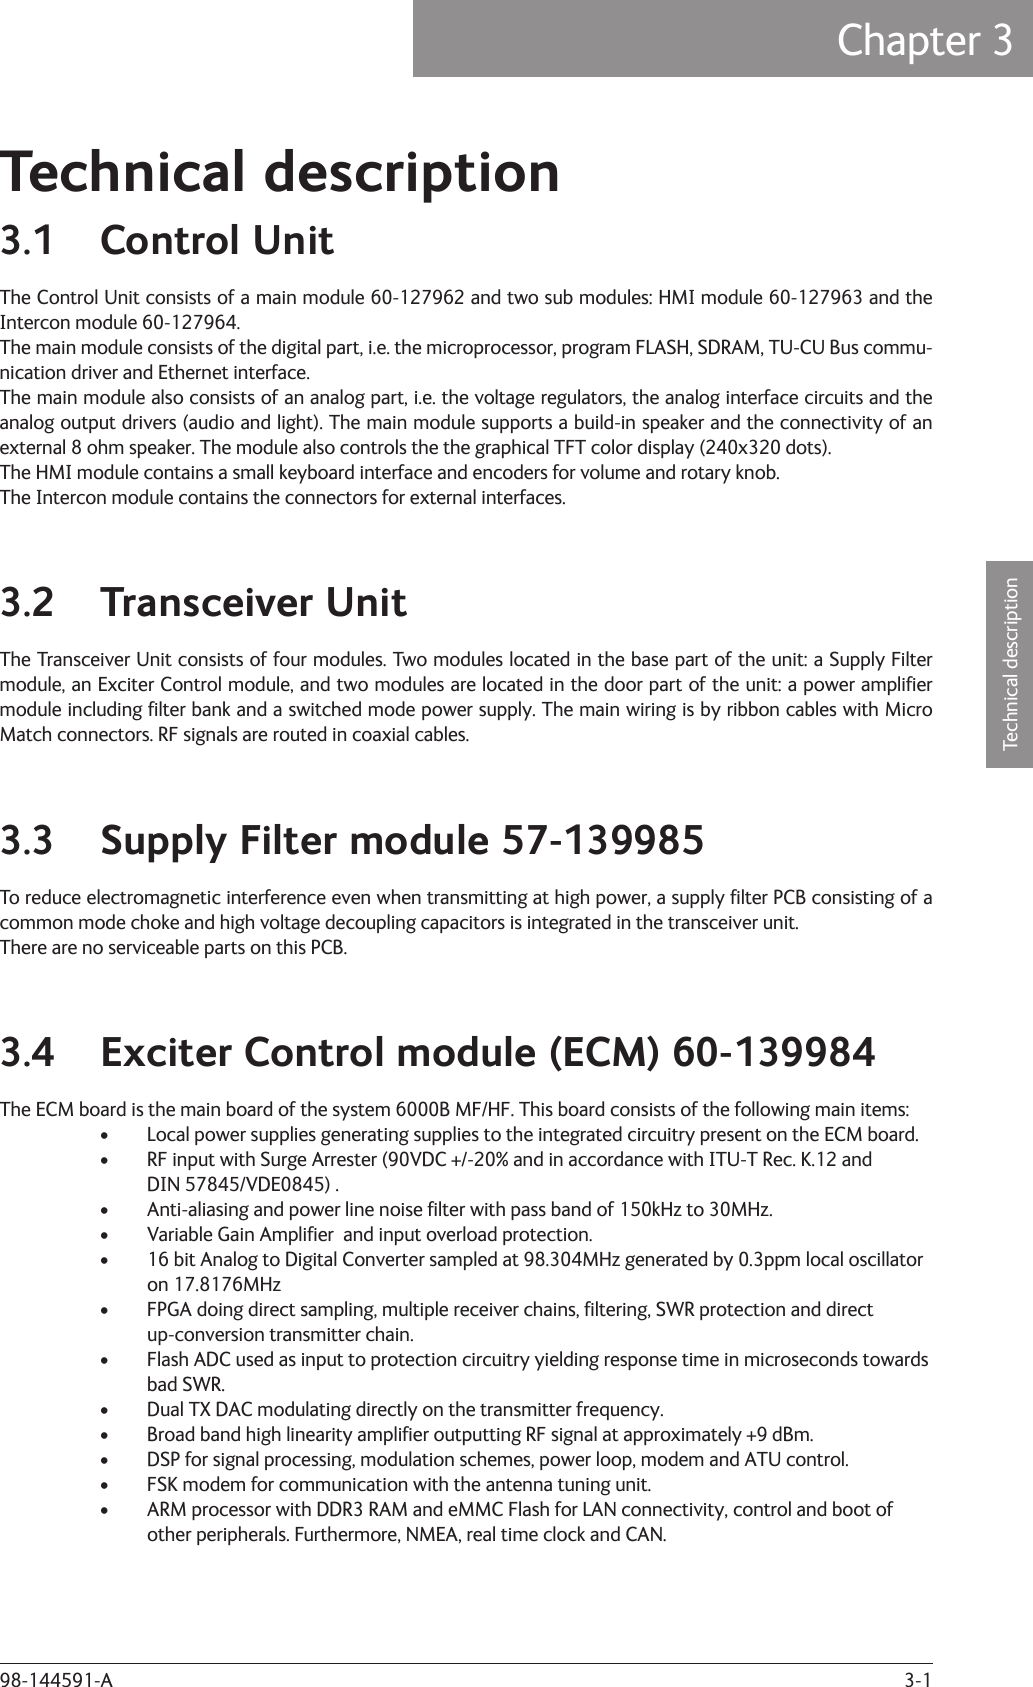 3-1Technical descriptionChapter 3: Technical description98-144591-ATechnical description3.1 Control UnitThe Control Unit consists of a main module 60-127962 and two sub modules: HMI module 60-127963 and the Intercon module 60-127964.The main module consists of the digital part, i.e. the microprocessor, program FLASH, SDRAM, TU-CU Bus commu-nication driver and Ethernet interface.The main module also consists of an analog part, i.e. the voltage regulators, the analog interface circuits and the analog output drivers (audio and light). The main module supports a build-in speaker and the connectivity of an external 8 ohm speaker. The module also controls the the graphical TFT color display (240x320 dots).The HMI module contains a small keyboard interface and encoders for volume and rotary knob.The Intercon module contains the connectors for external interfaces.3.2 Transceiver UnitThe Transceiver Unit consists of four modules. Two modules located in the base part of the unit: a Supply Filter module, an Exciter Control module, and two modules are located in the door part of the unit: a power ampliﬁ er module including ﬁ lter bank and a switched mode power supply. The main wiring is by ribbon cables with Micro Match connectors. RF signals are routed in coaxial cables.3.3  Supply Filter module 57-139985To reduce electromagnetic interference even when transmitting at high power, a supply ﬁ lter PCB consisting of a common mode choke and high voltage decoupling capacitors is integrated in the transceiver unit.There are no serviceable parts on this PCB.3.4  Exciter Control module (ECM) 60-139984The ECM board is the main board of the system 6000B MF/HF. This board consists of the following main items:•  Local power supplies generating supplies to the integrated circuitry present on the ECM board.•  RF input with Surge Arrester (90VDC +/-20% and in accordance with ITU-T Rec. K.12 and  DIN 57845/VDE0845) .•  Anti-aliasing and power line noise ﬁ lter with pass band of 150kHz to 30MHz.•  Variable Gain Ampliﬁ er  and input overload protection.•  16 bit Analog to Digital Converter sampled at 98.304MHz generated by 0.3ppm local oscillator on 17.8176MHz•  FPGA doing direct sampling, multiple receiver chains, ﬁ ltering, SWR protection and direct  up-conversion transmitter chain.•  Flash ADC used as input to protection circuitry yielding response time in microseconds towards bad SWR.•  Dual TX DAC modulating directly on the transmitter frequency.•  Broad band high linearity ampliﬁ er outputting RF signal at approximately +9 dBm.•  DSP for signal processing, modulation schemes, power loop, modem and ATU control.•  FSK modem for communication with the antenna tuning unit.•  ARM processor with DDR3 RAM and eMMC Flash for LAN connectivity, control and boot of  other peripherals. Furthermore, NMEA, real time clock and CAN.Chapter 3